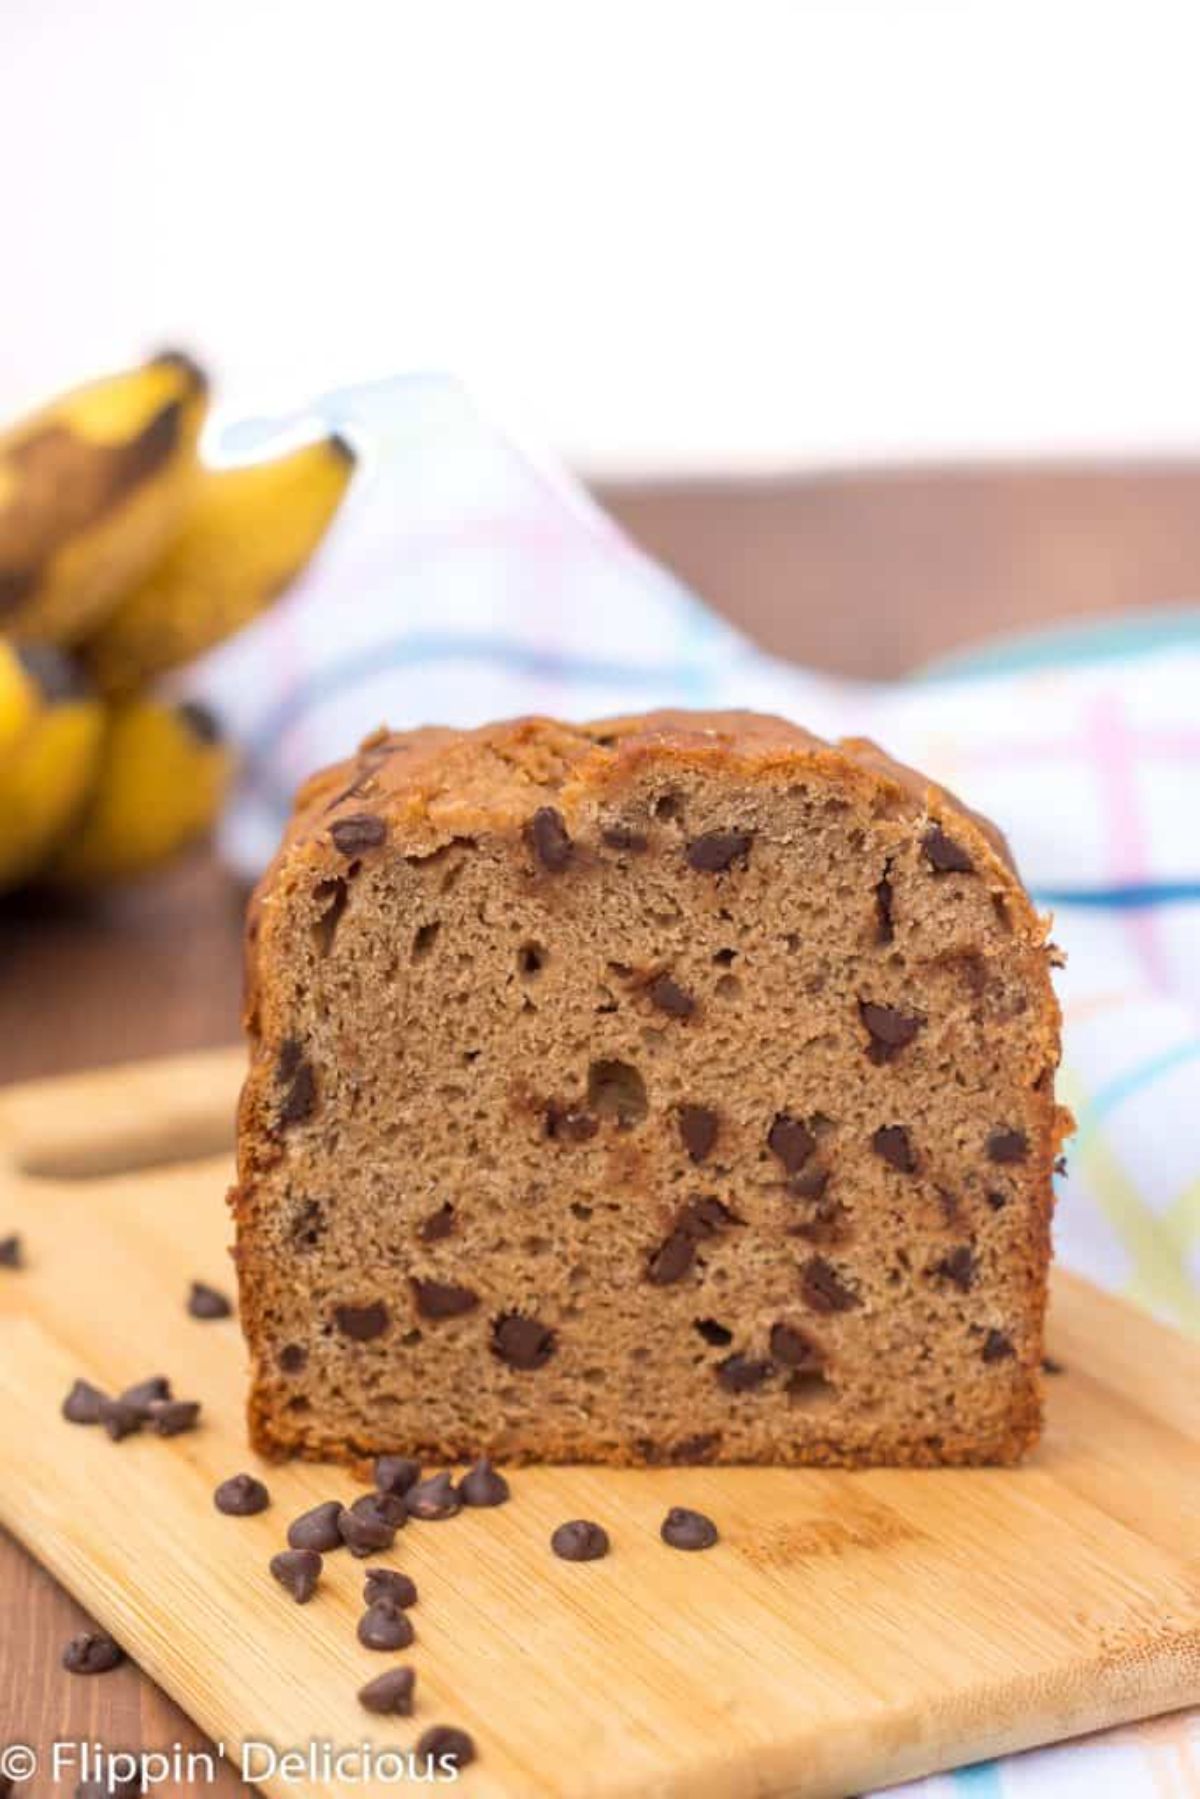 Loaf of Gluten-Free Chocolate Chip Banana Bread on a wooden cutting board.